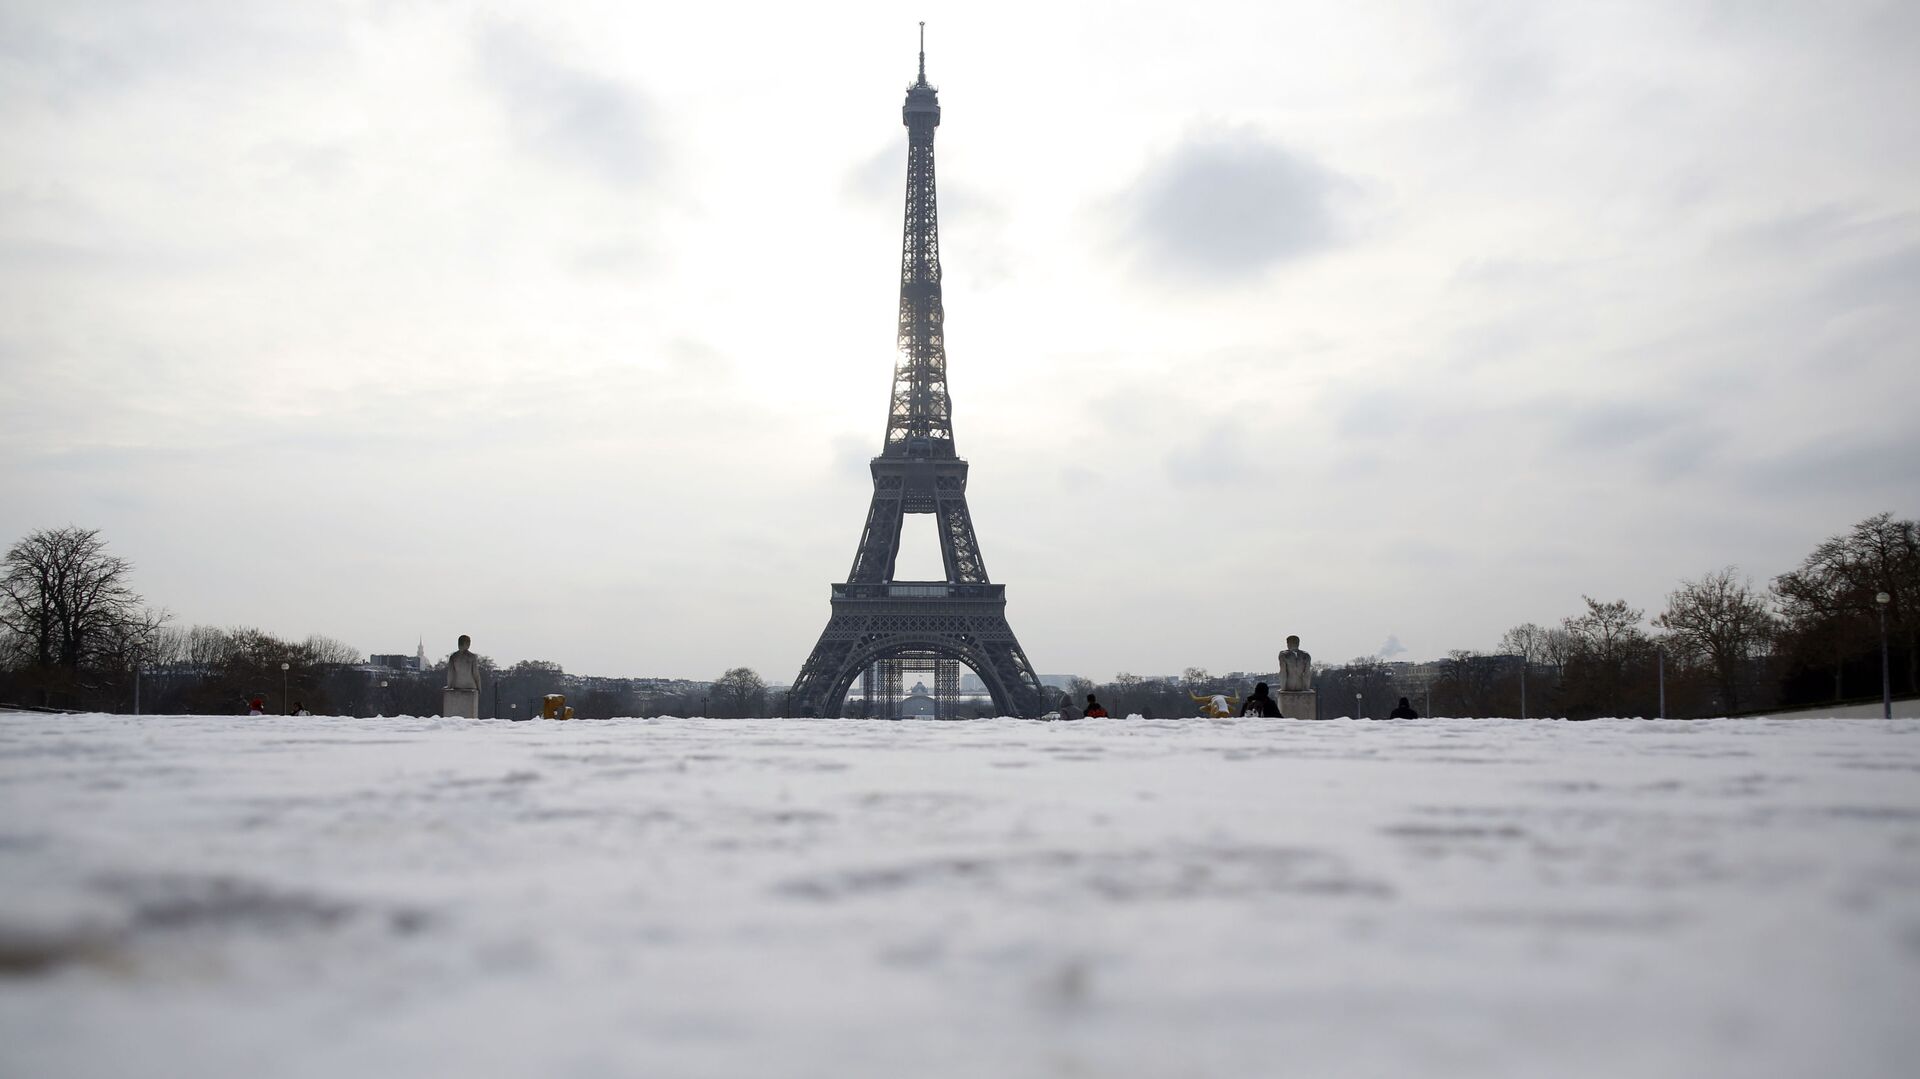 Snow covers the Trocadero gardens with the Eiffel Tower in the background, in Paris, Wednesday, Feb. 10, 2021 - Sputnik International, 1920, 05.10.2021